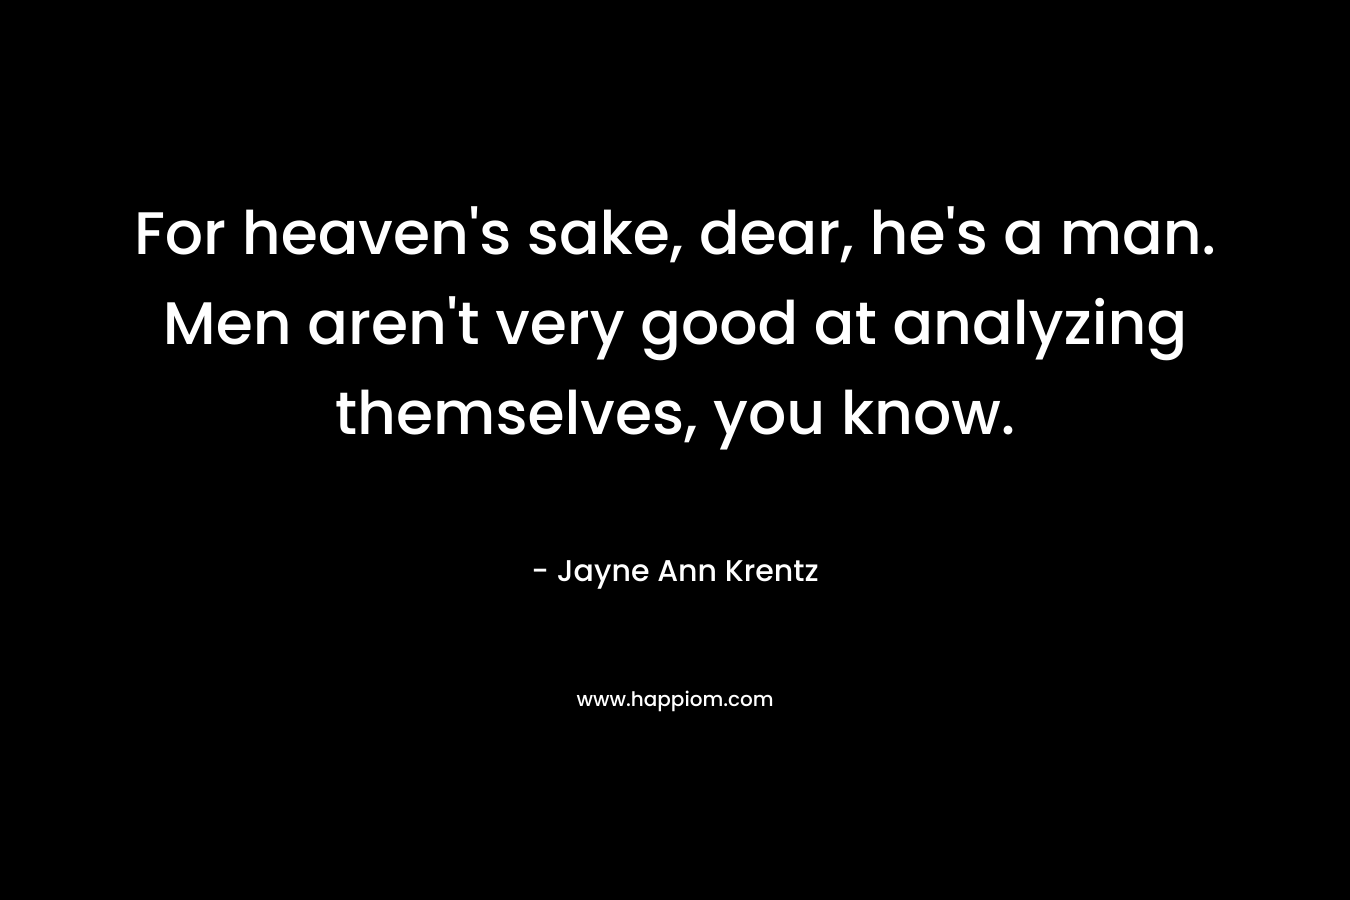 For heaven’s sake, dear, he’s a man. Men aren’t very good at analyzing themselves, you know. – Jayne Ann Krentz